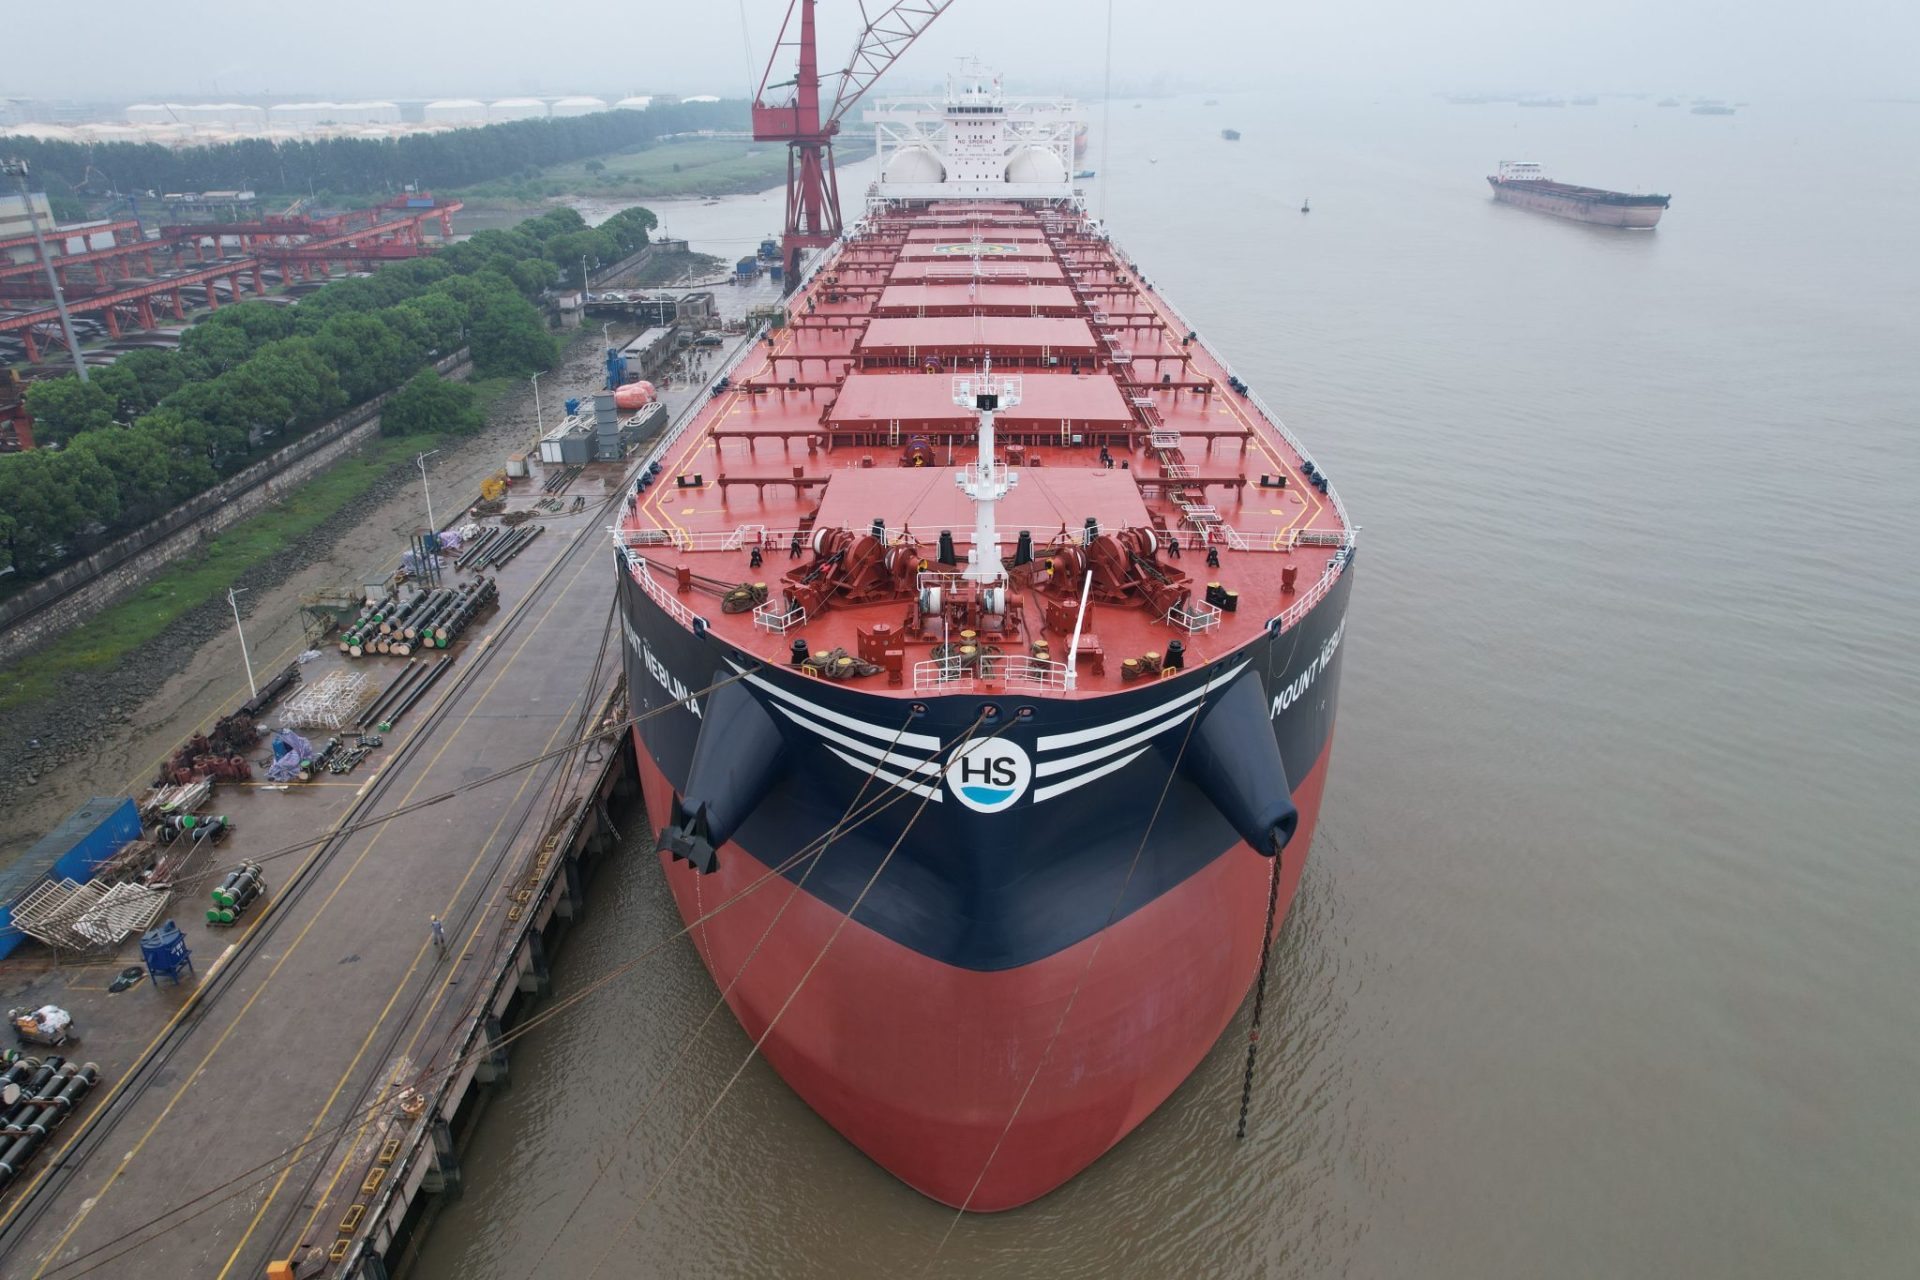 Classification society DNV has added 21 LNG-powered ships to its Alternative Fuels Insight platform in August, seven ships more compared to the previous month.